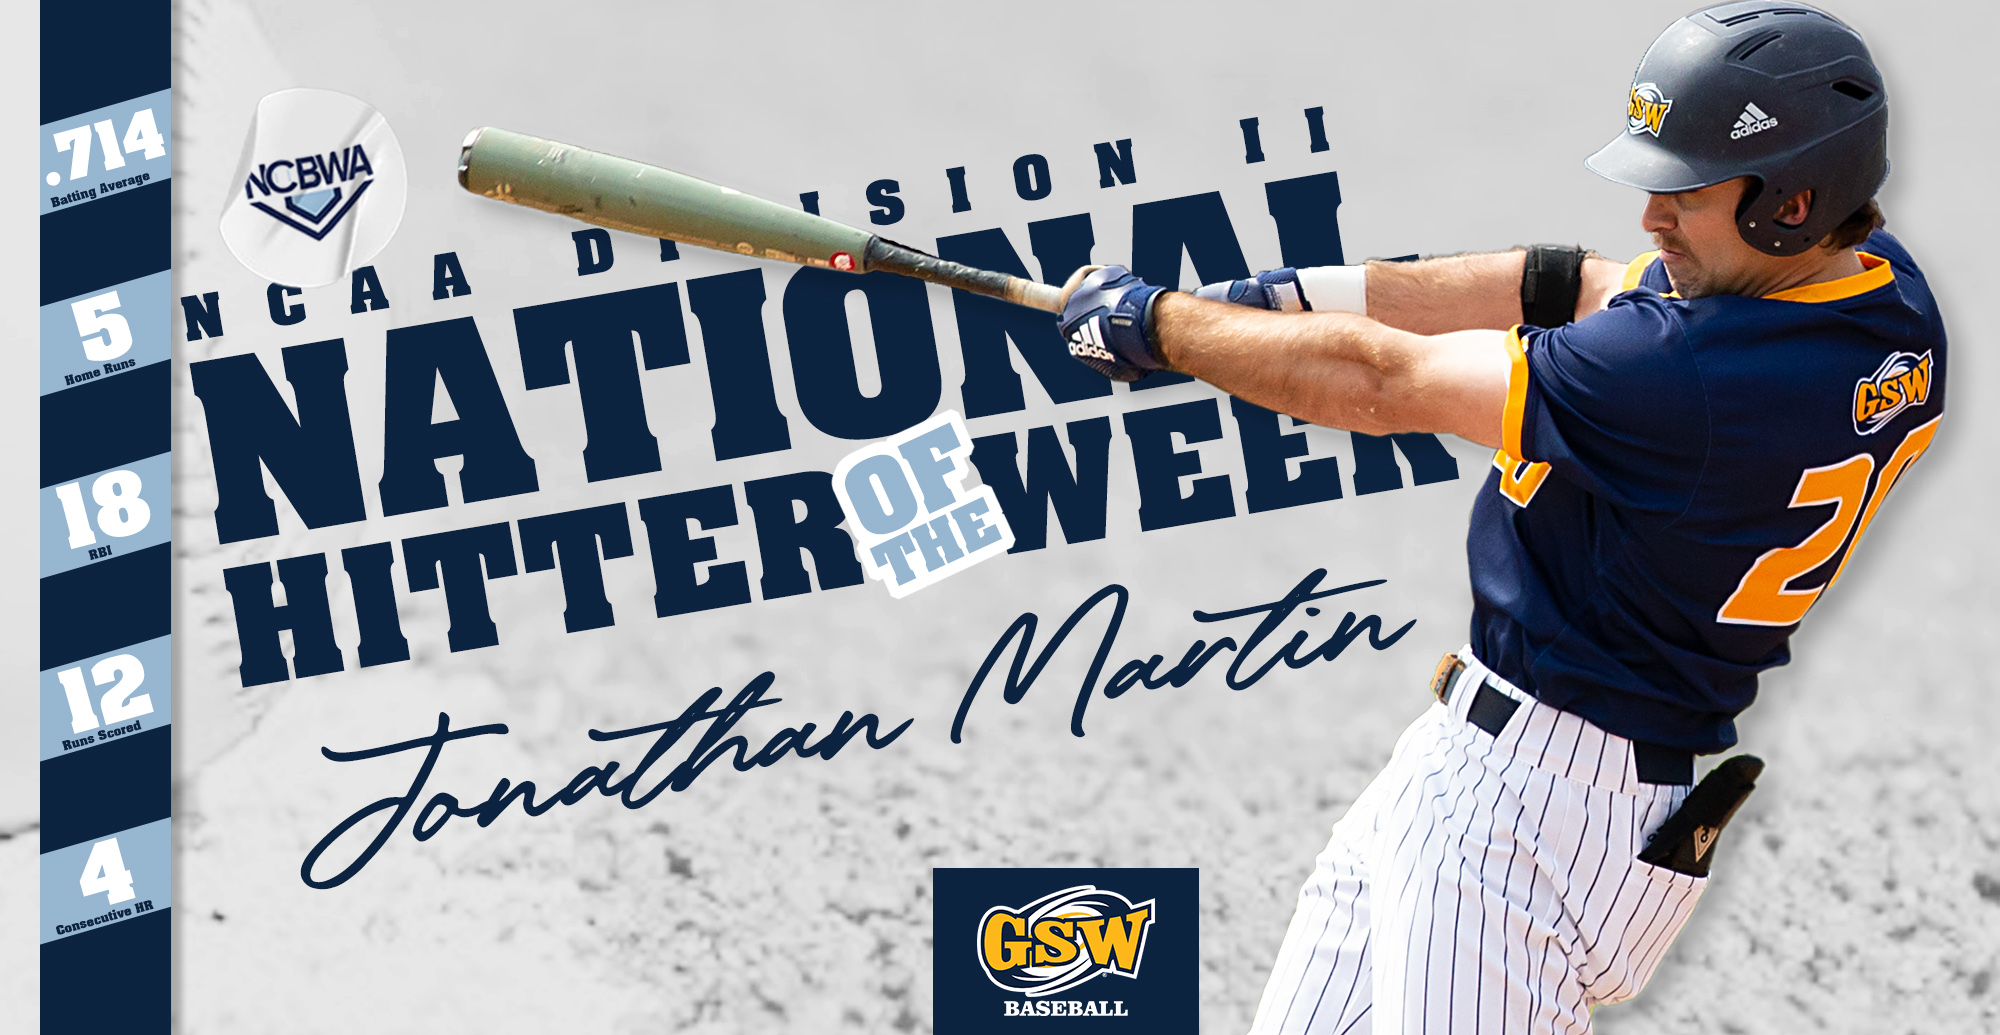 Martin Earns NCAA D2 National Hitter of the Week Honors